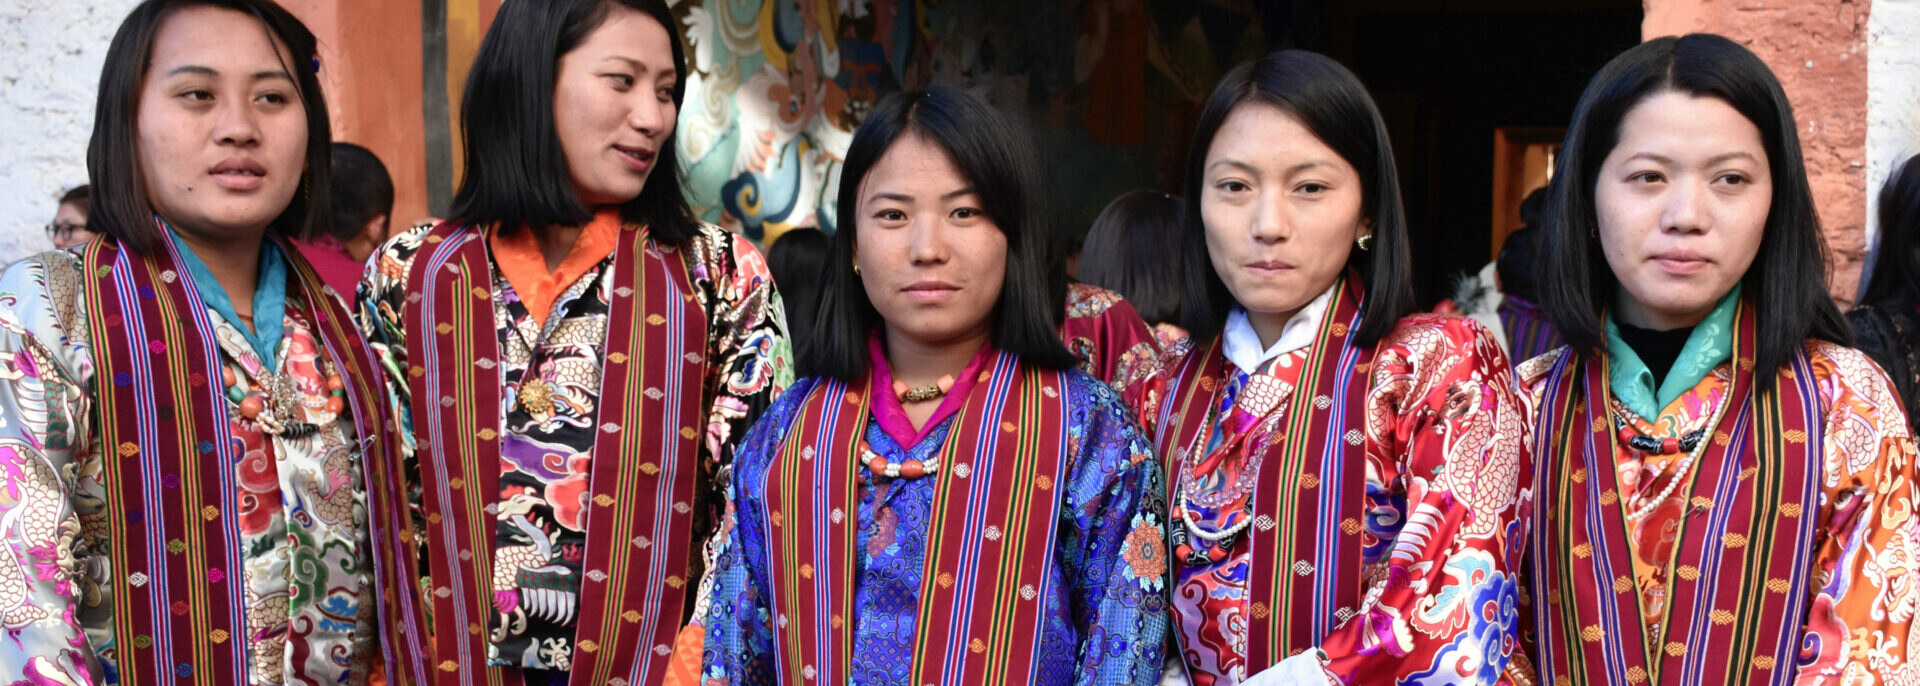 Five young women at a festival pose in their traditional Bhutanese blouses made of imported Chinese brocade.